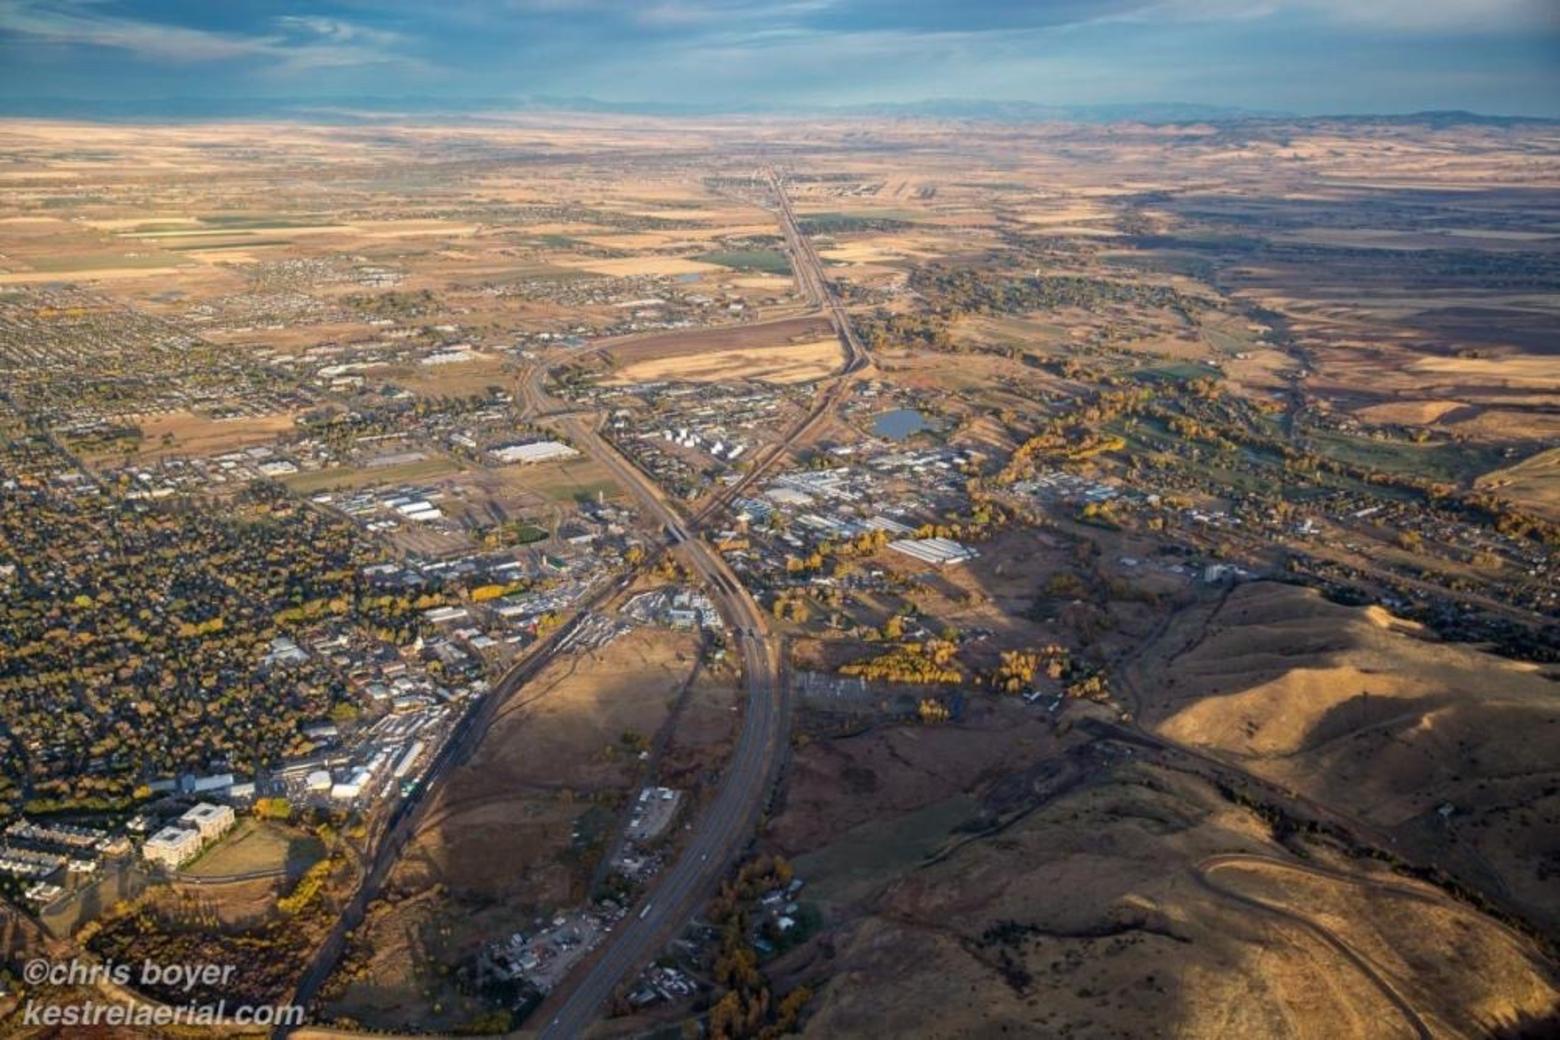 Photograph of Bozeman courtesy Christopher Boyer (check out his work at kestrelaerial.com)